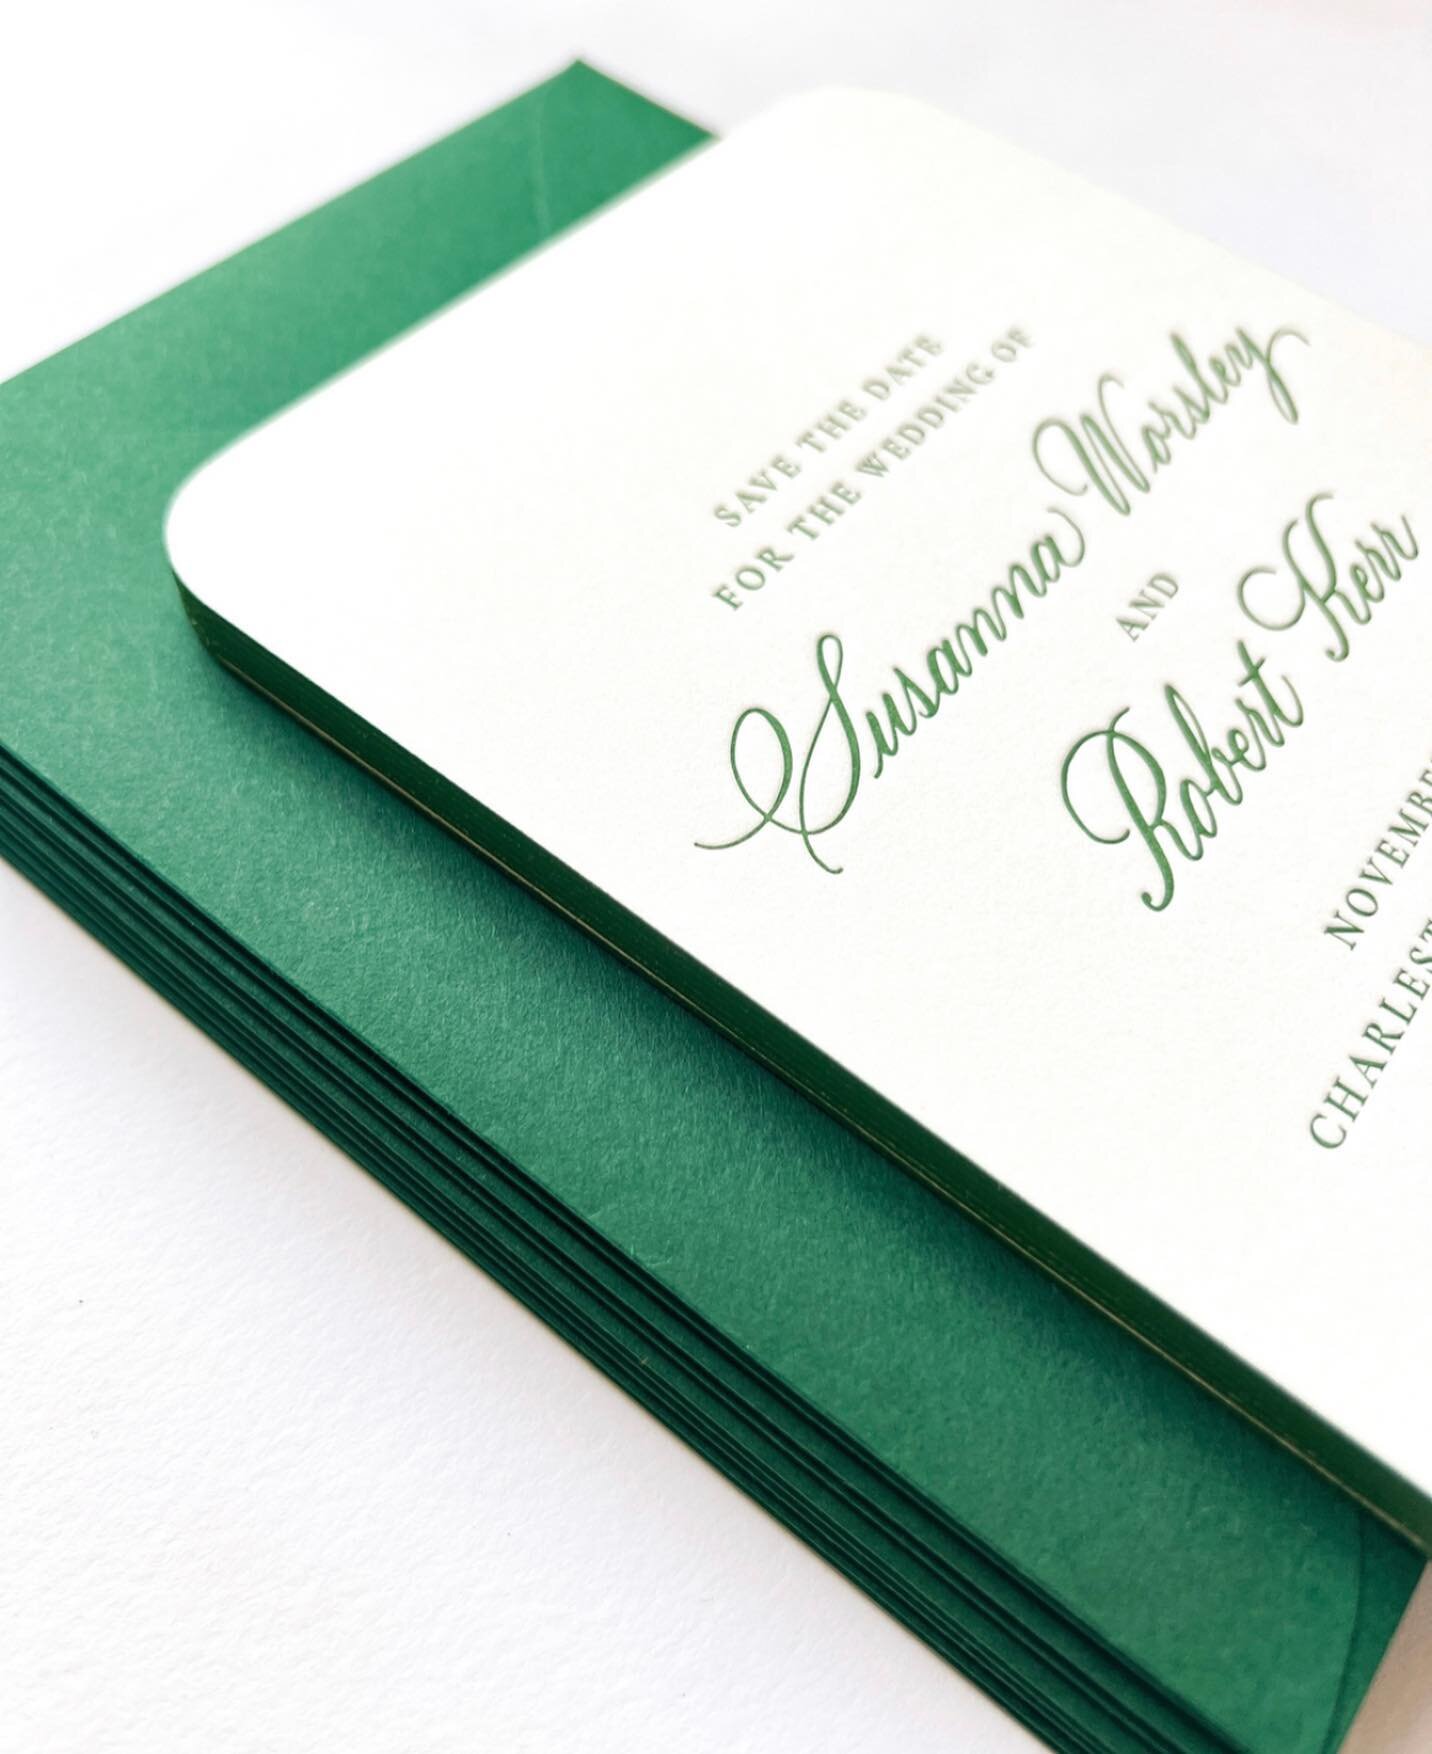 Love seeing my spot calligraphy come to life in luscious green letterpress by @bygeorgepress With a Save the Date this lovely, you know the invitation suite is going to be a showstopper. Stay tuned!